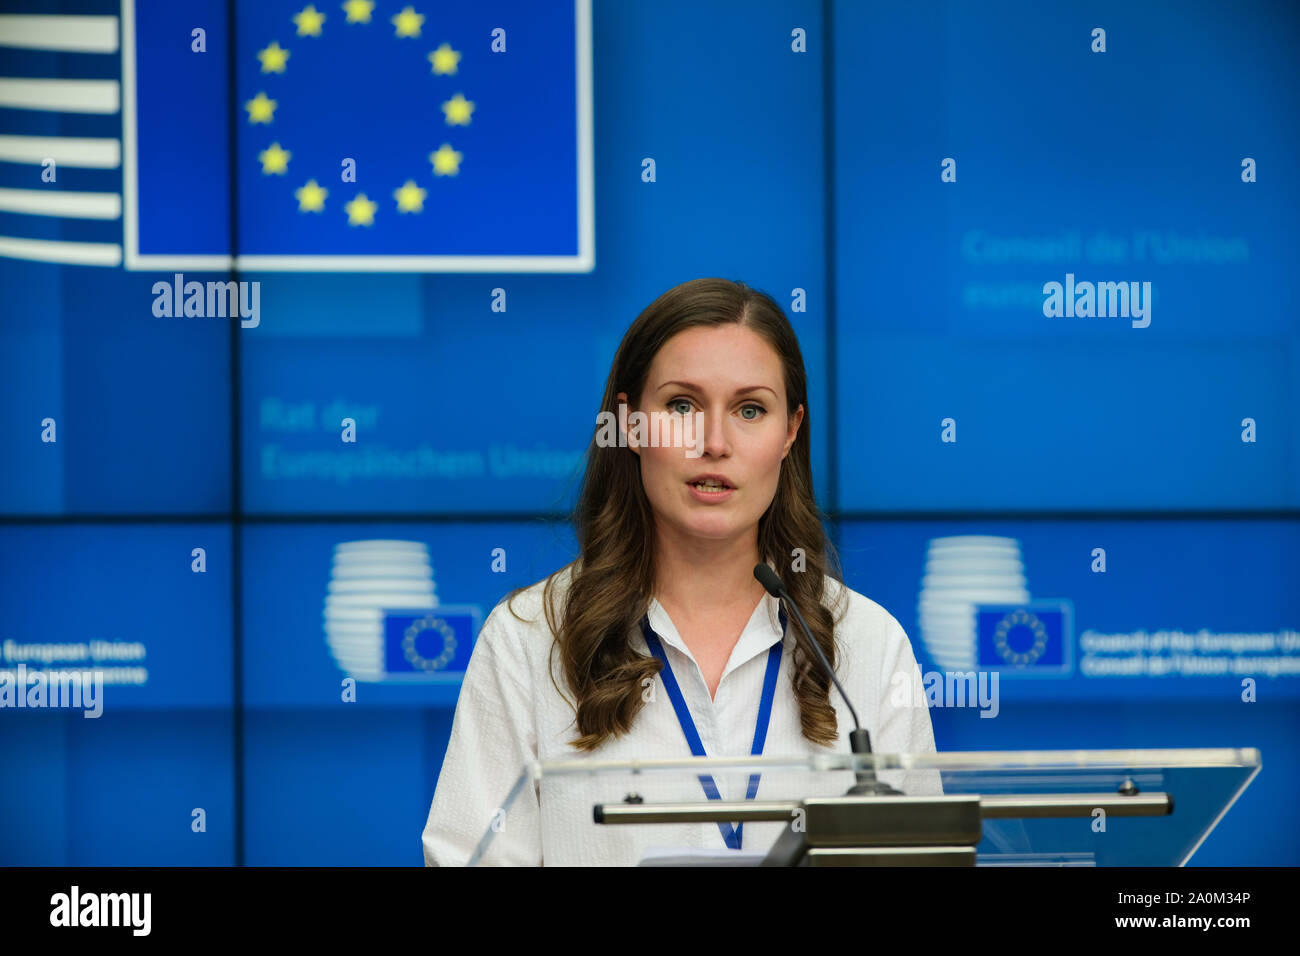 Brussels, Belgium. 20th Sep, 2019. Finnish Minister for Transport and Communications Sanna Marin attends a press conference of the EU Transport, Telecommunications and Energy Council, in Brussels, Belgium, Sept. 20, 2019. Credit: Zhang Cheng/Xinhua/Alamy Live News Stock Photo